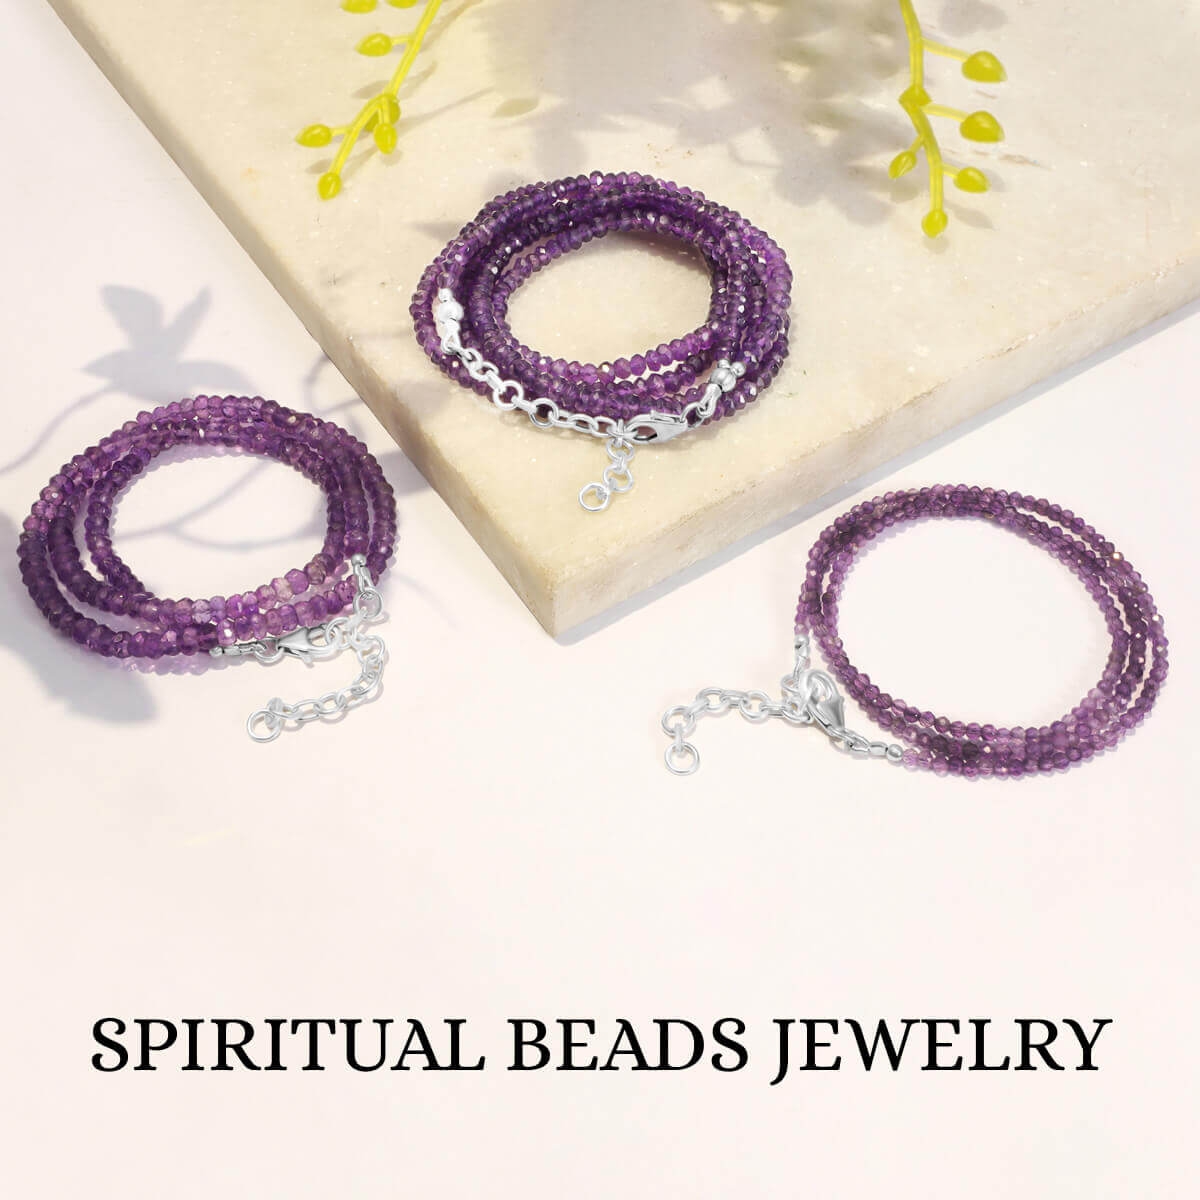 Meaning of Beads Jewelry